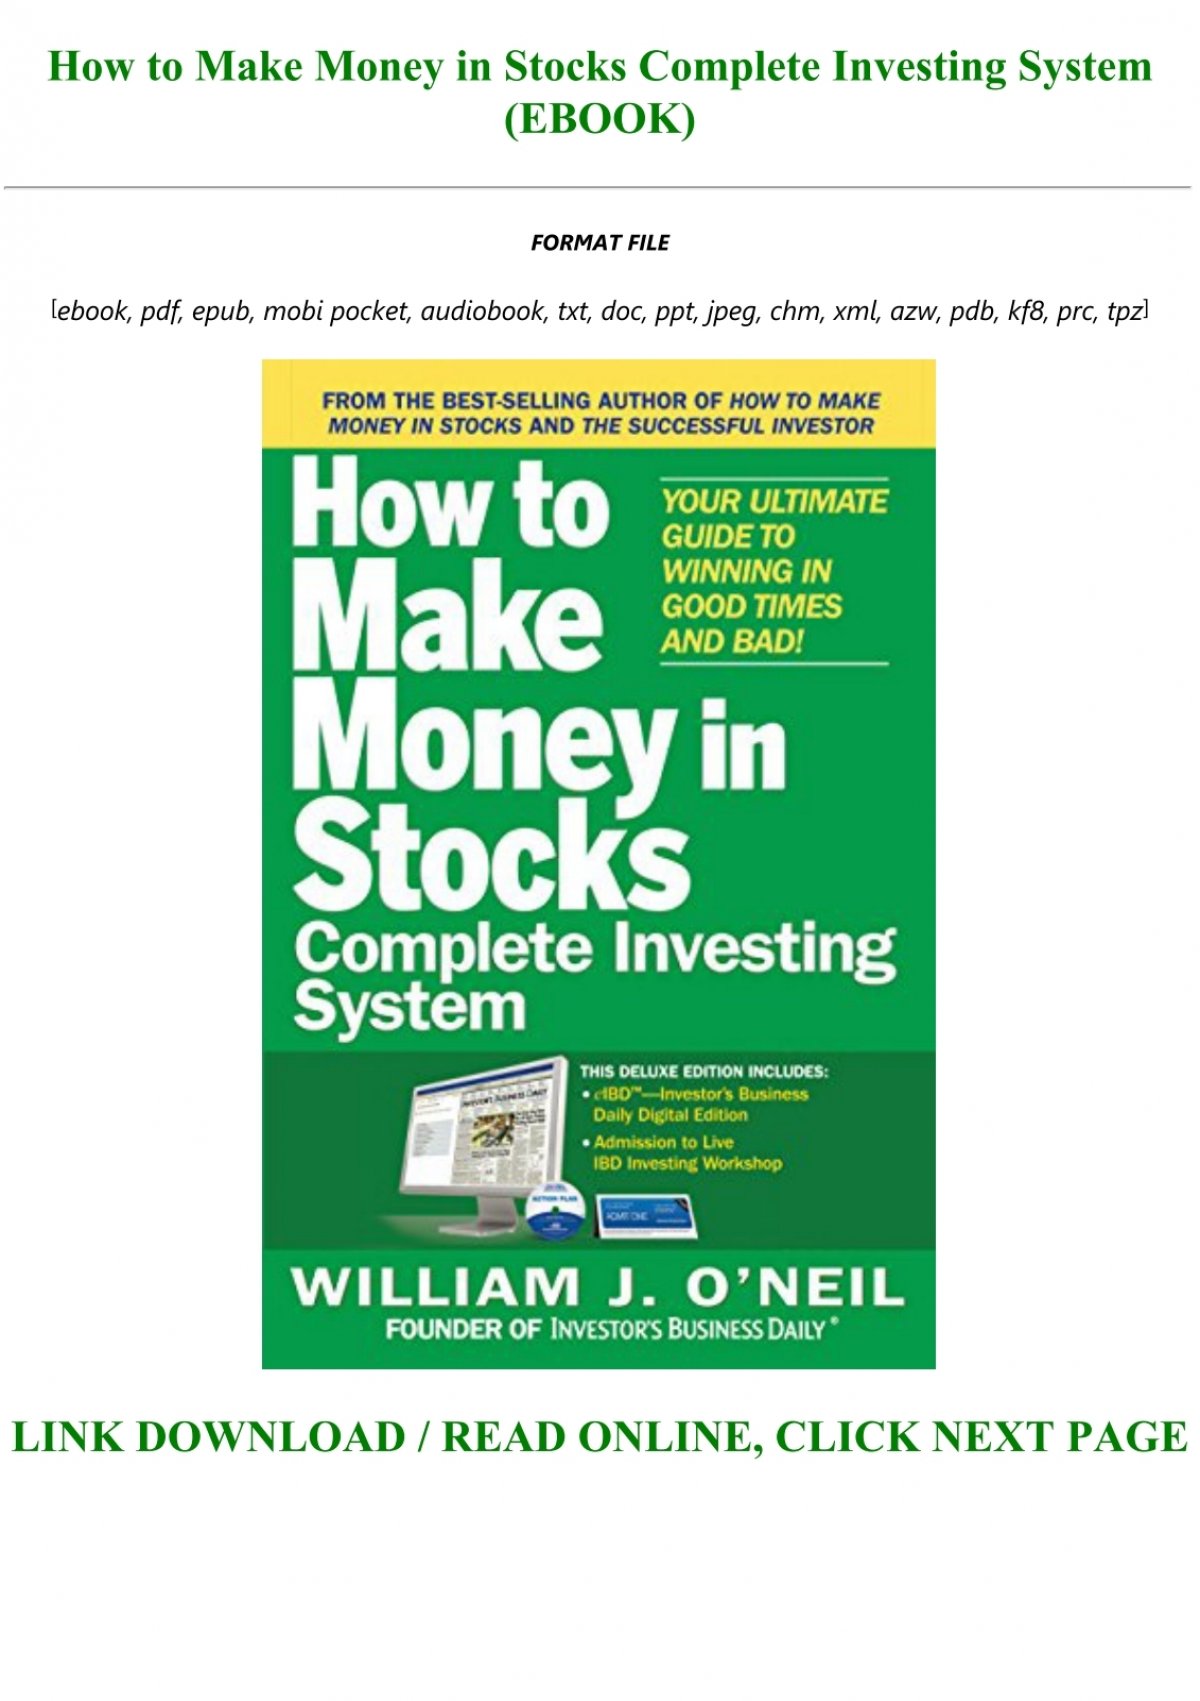 reduce taxes investing in stocks - Money|Stocks|Stock|System|Book|Market|Trading|Books|Guide|Times|Day|Der|Download|Investors|Edition|Investor|Description|Pdf|Format|Epub|O'neil|Die|Strategies|Strategy|Mit|Investing|Dummies|Risk|Gains|Business|Man|Investment|Years|World|Wie|Action|Charts|William|Dad|Plan|Good Times|Stock Market|Ultimate Guide|Mobi Format|Full Book|Day Trading|National Bestseller|Successful Investing|Rich Dad|Seven-Step Process|Maximizing Gains|Major Study|American Association|Individual Investors|Mutual Funds|Book Description|Download Book Description|Handbuch Des|Stock Market Winners|12-Year Study|Leading Investment Strategies|Top-Performing Strategy|System-You Get|Easy Steps|Daily Resource|Big Winners|Market Rally|Big Losses|Market Downturn|Canslim Method